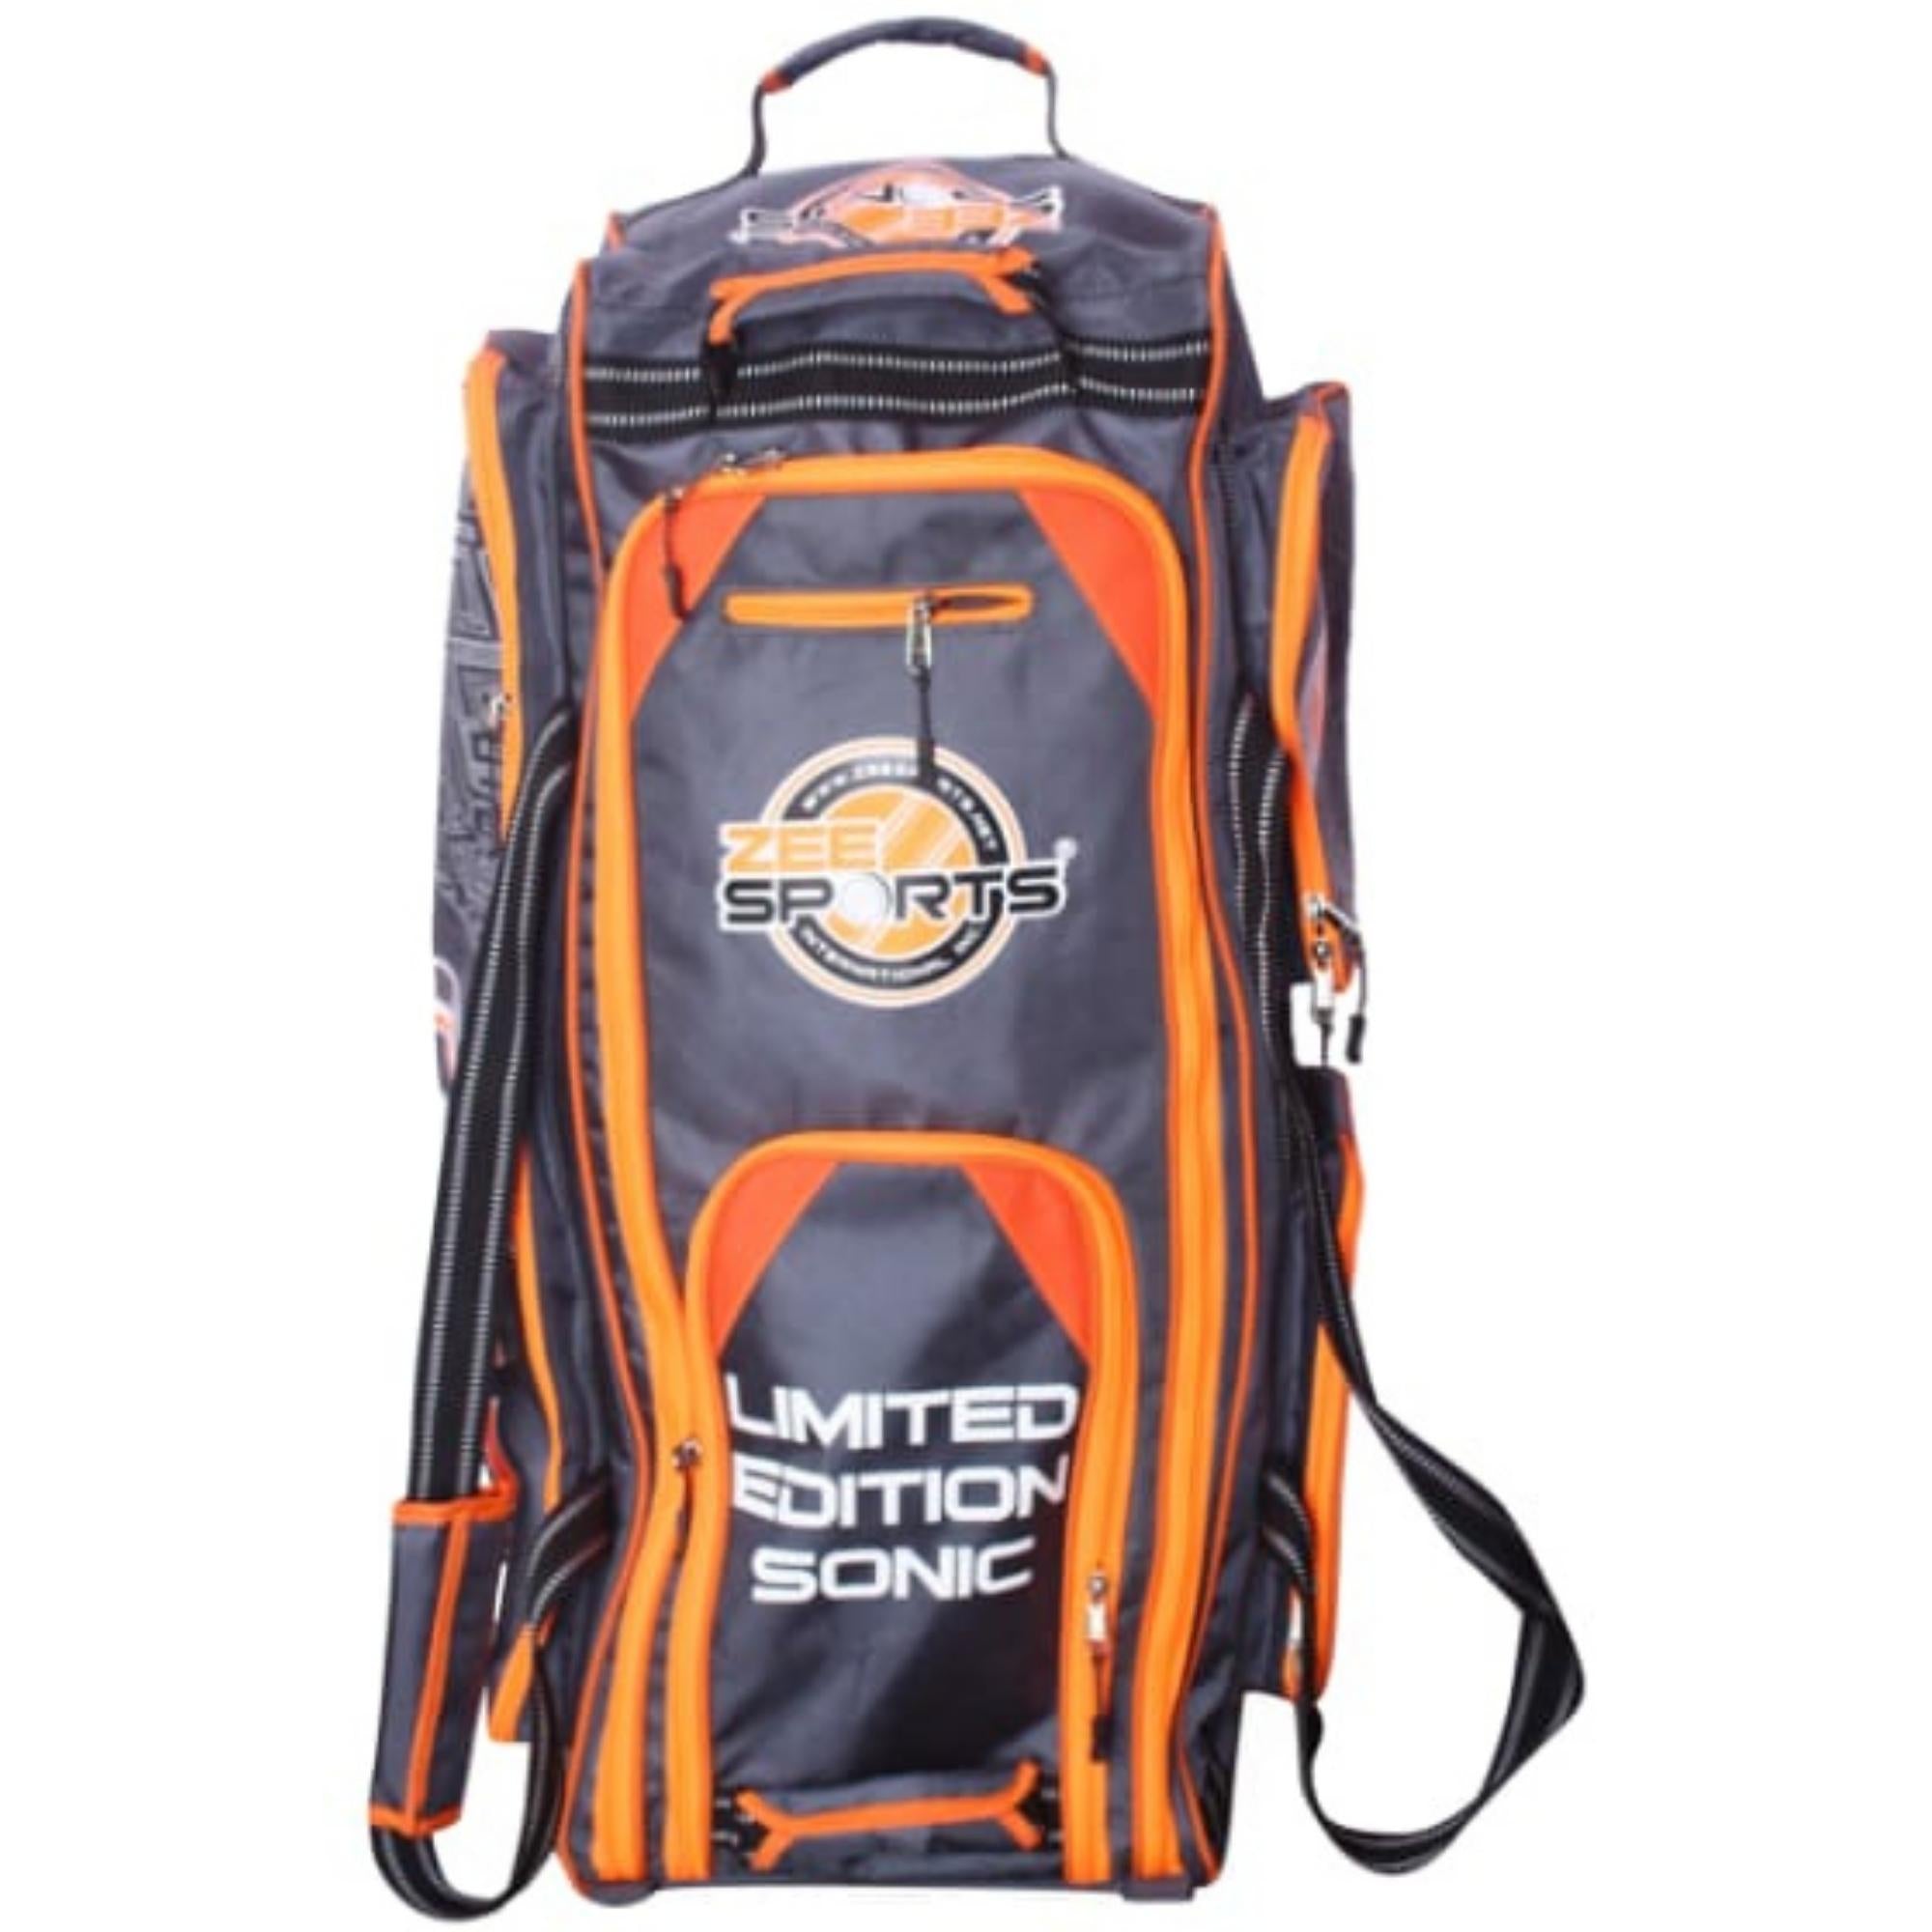 Zee Sports Kit Bag Limited Edition Sonic